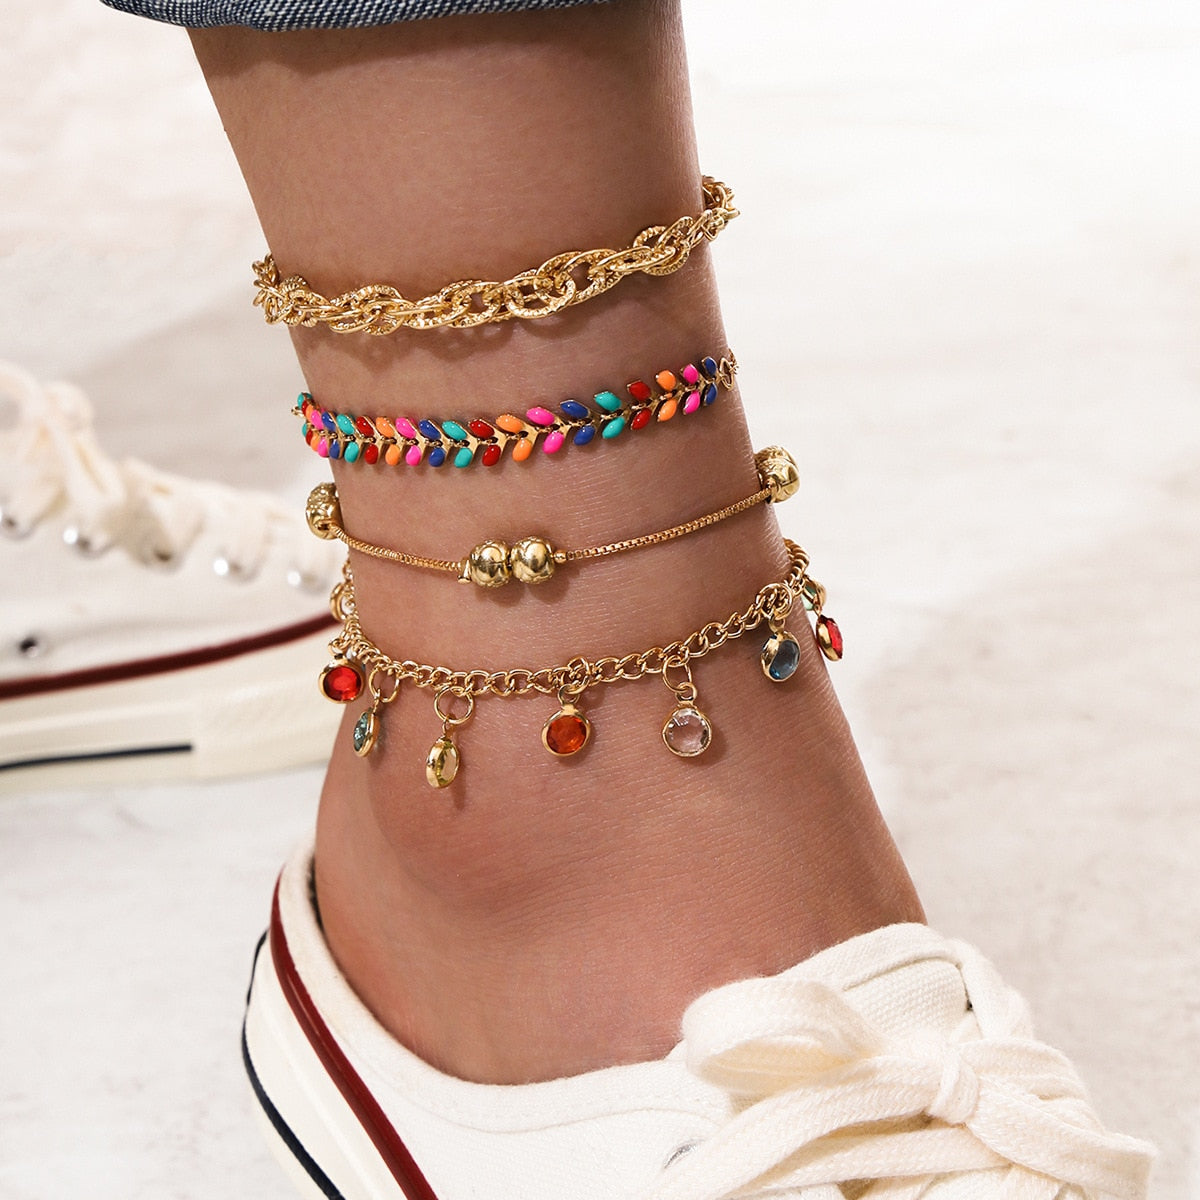 4pc/set Bohemia Shell Chain Anklet Sets For Women Sequins Ankle Bracelet On Leg Foot Trendy Summer Beach Jewelry Gift